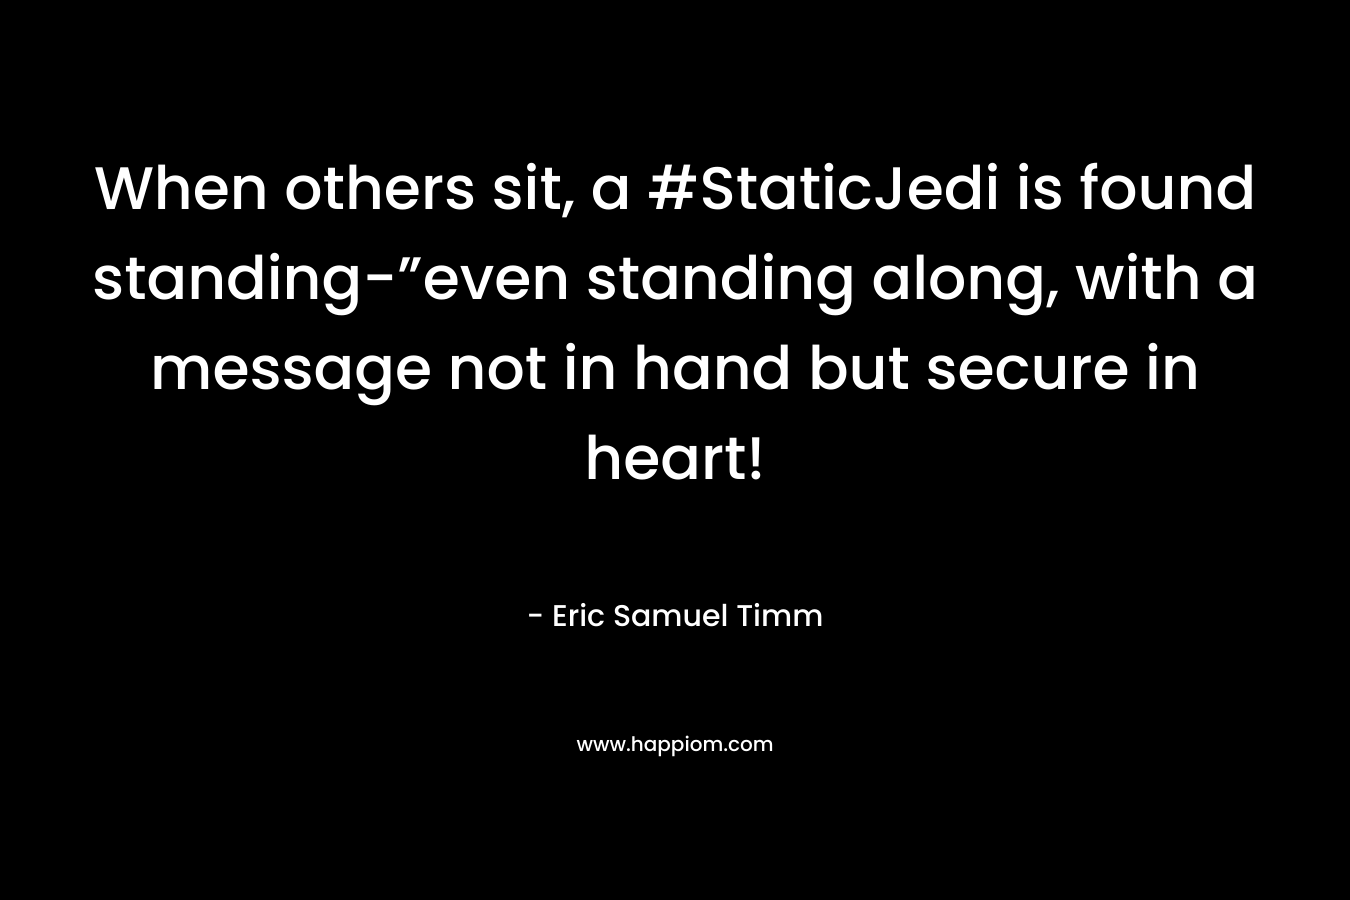 When others sit, a #StaticJedi is found standing-”even standing along, with a message not in hand but secure in heart!